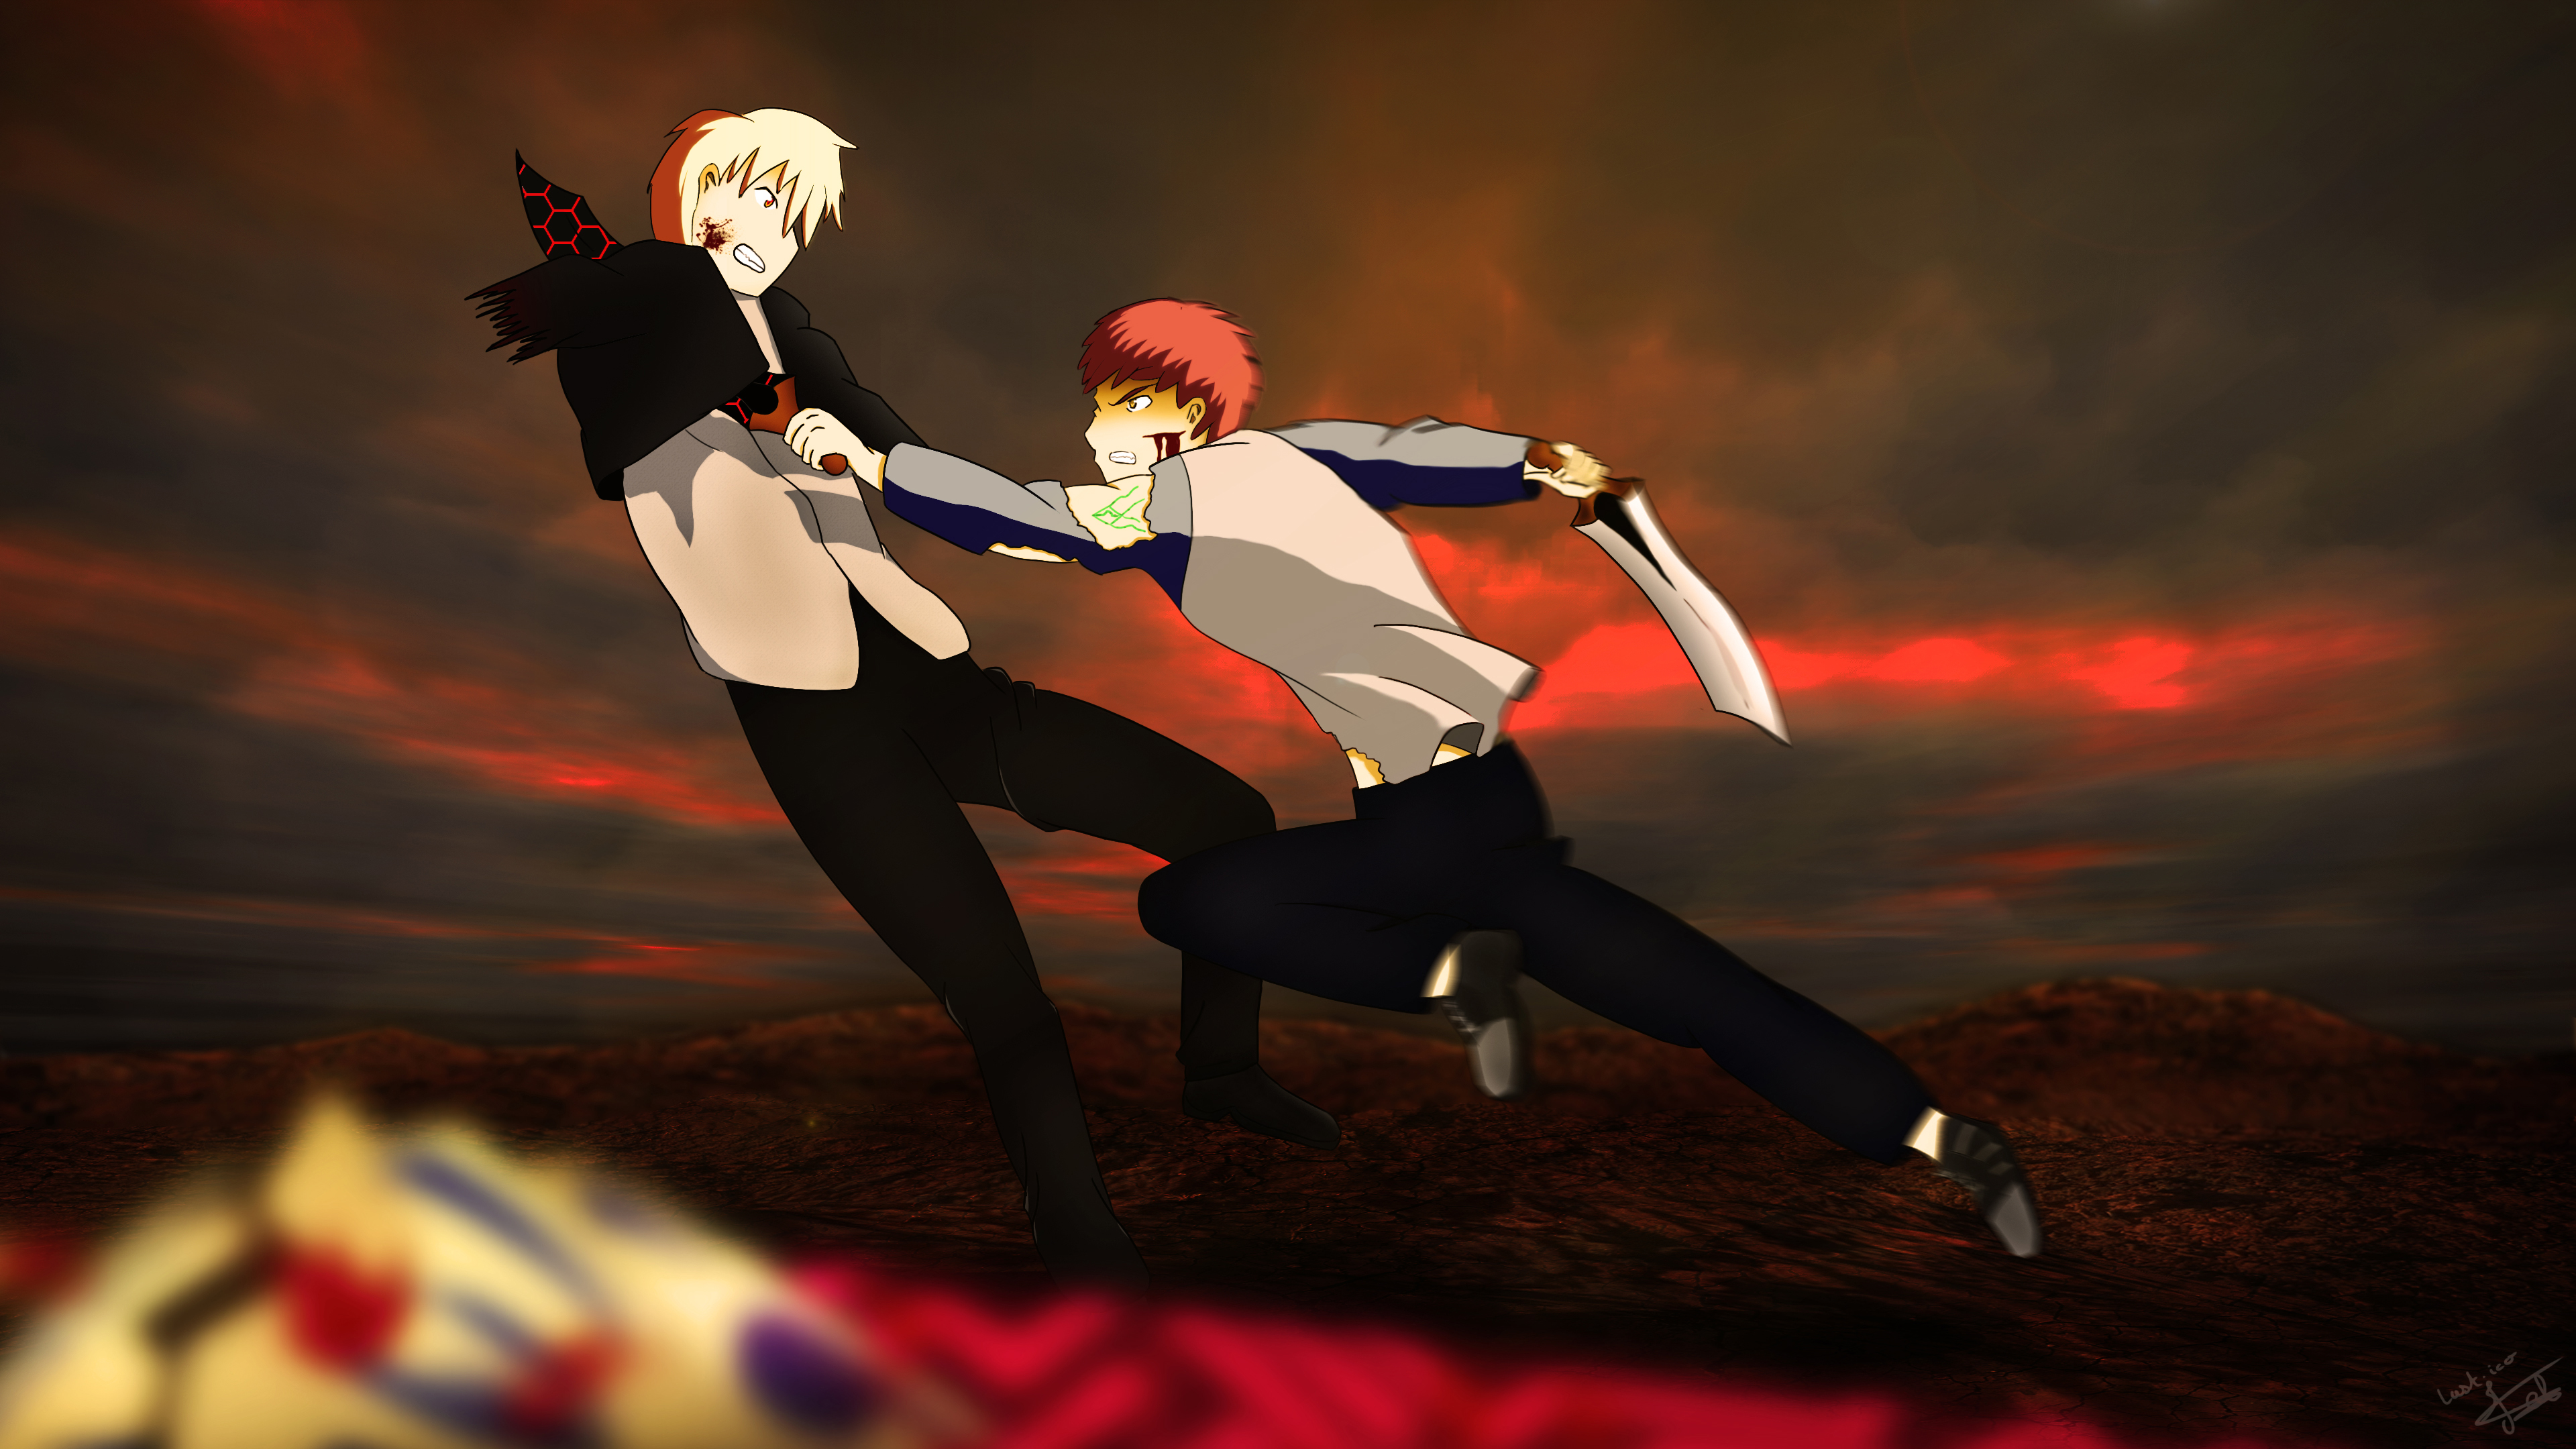 Anime FateStay Night Unlimited Blade Works FateStay Night Unlimited